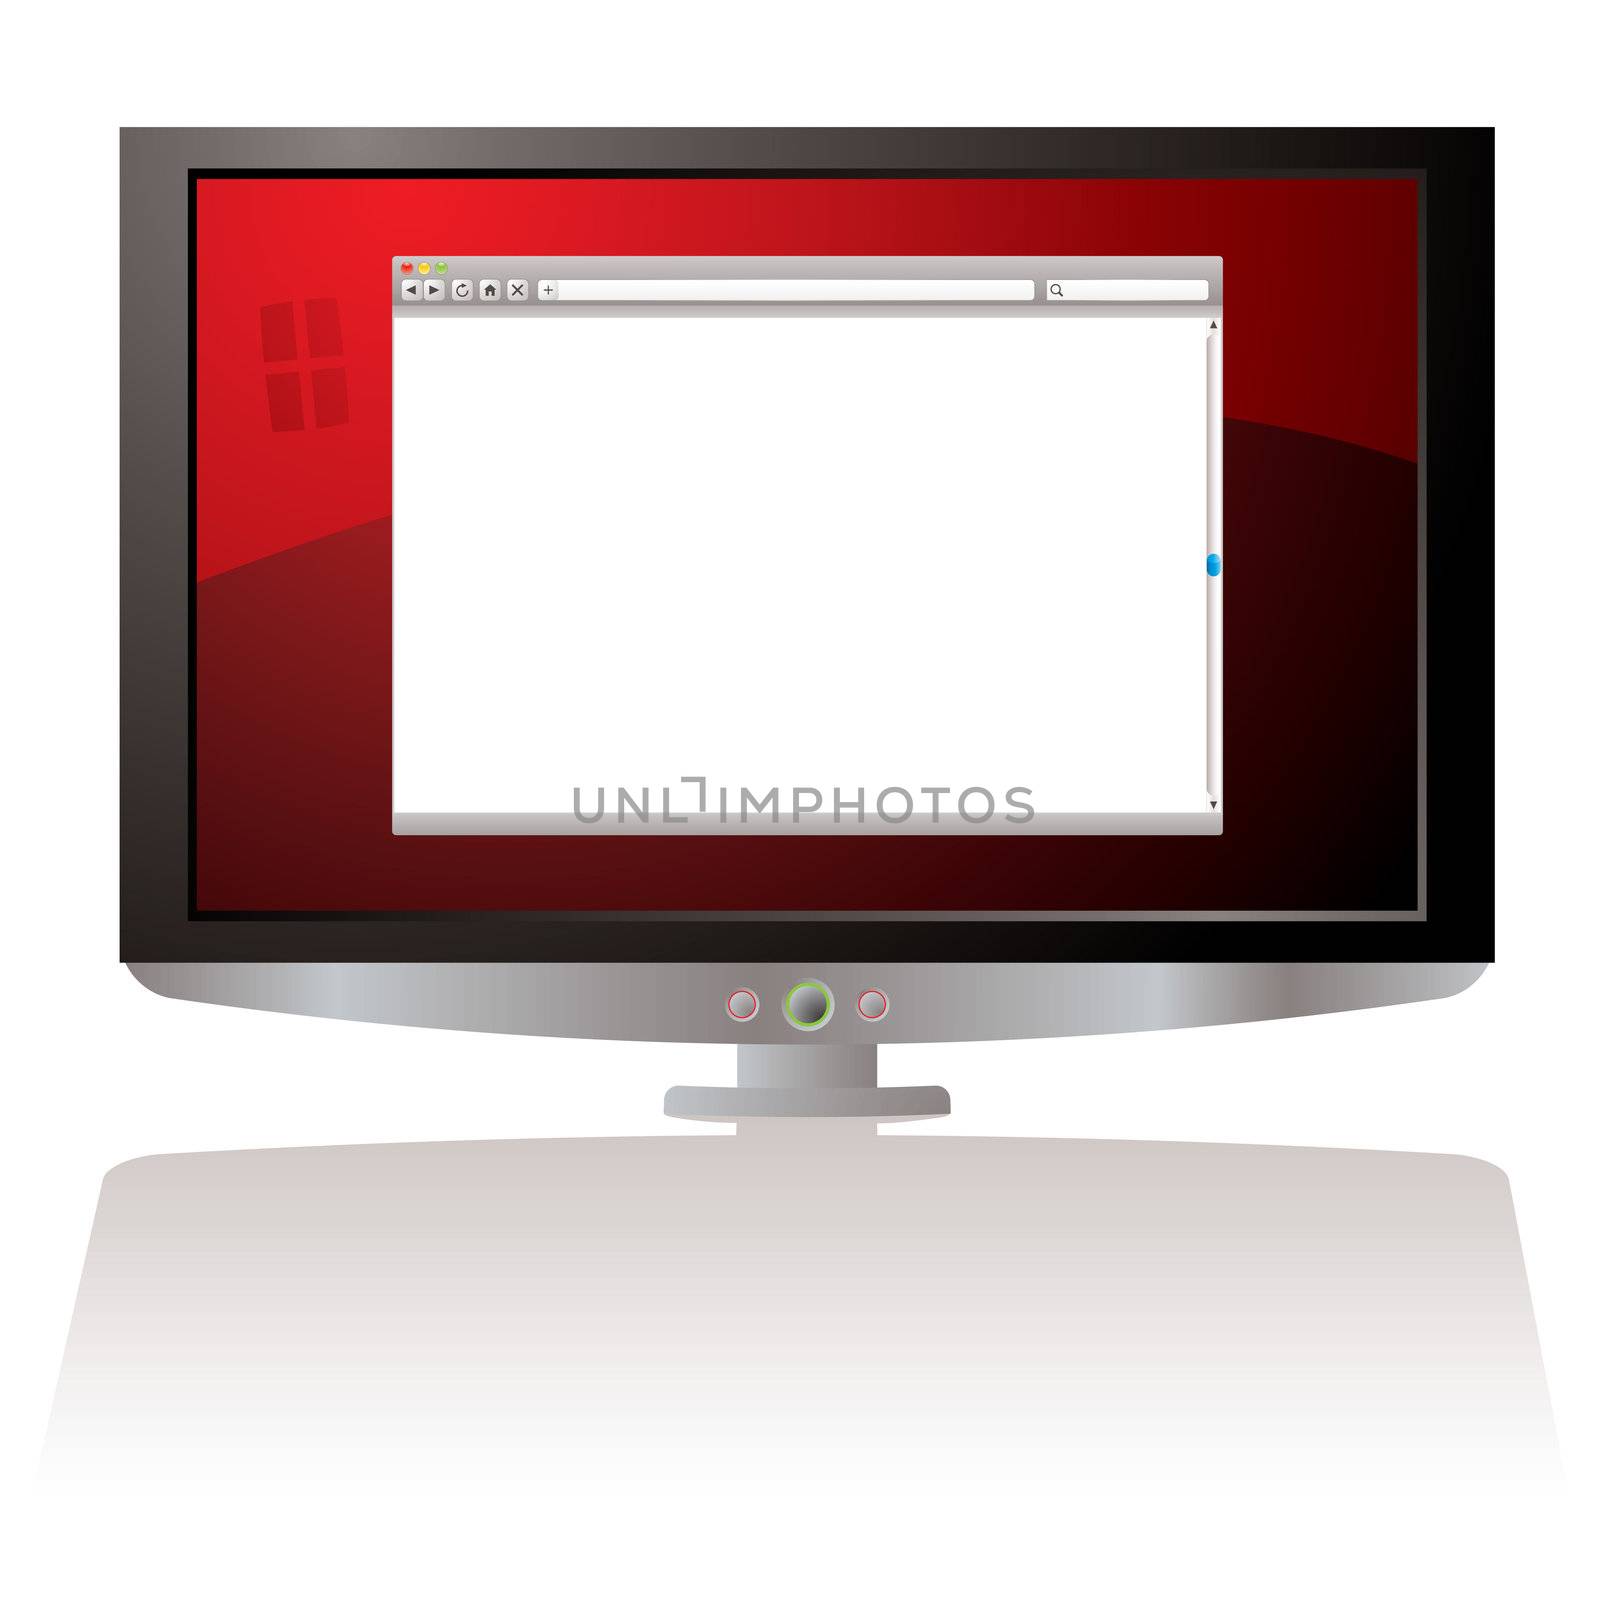 LCD Monitor with red background and web browser